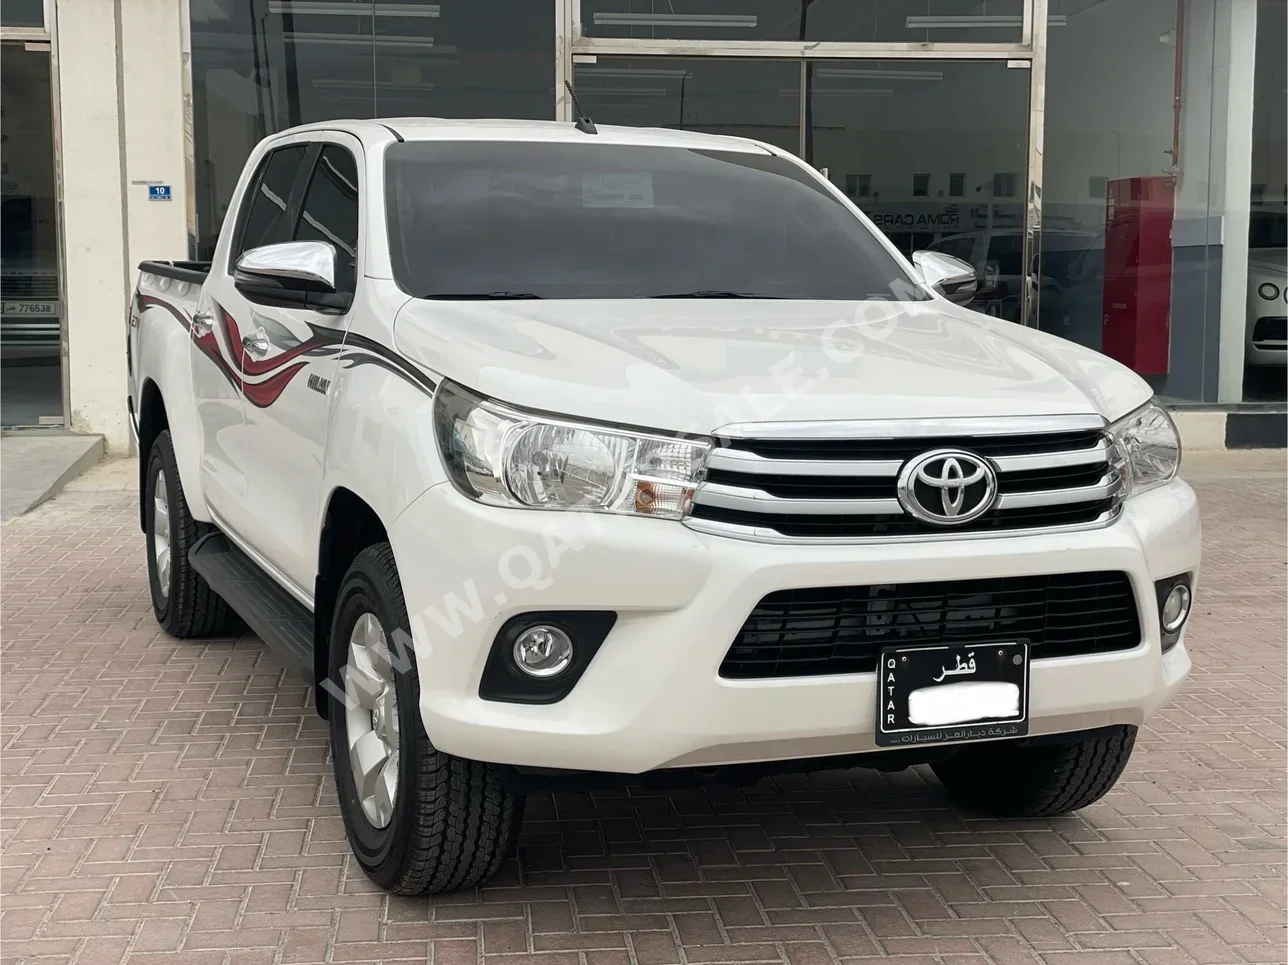 Toyota  Hilux  SR5  2018  Automatic  83,000 Km  4 Cylinder  Four Wheel Drive (4WD)  Pick Up  White